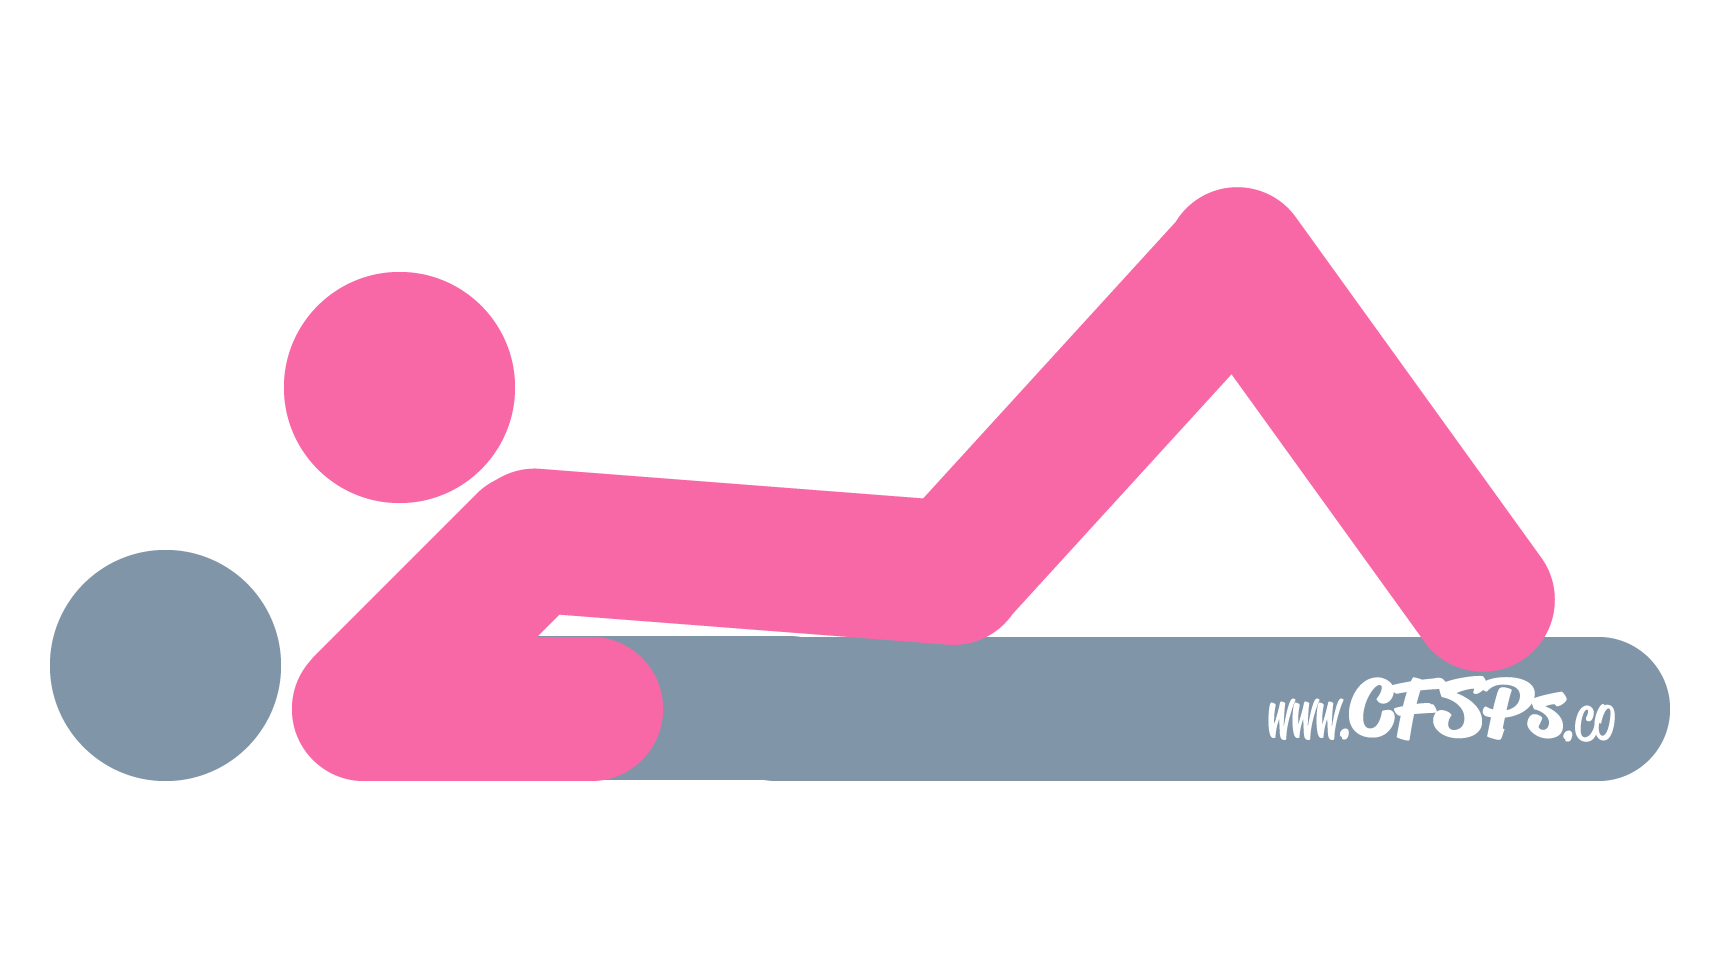 This stick figure image depicts a man and woman having sex in the Double Decker sex position. The man is lying on his back with his legs together. The woman is lying on her back on top of him with her knees bent and feet on the bed near his feet, and her elbows supporting her near his shoulders.